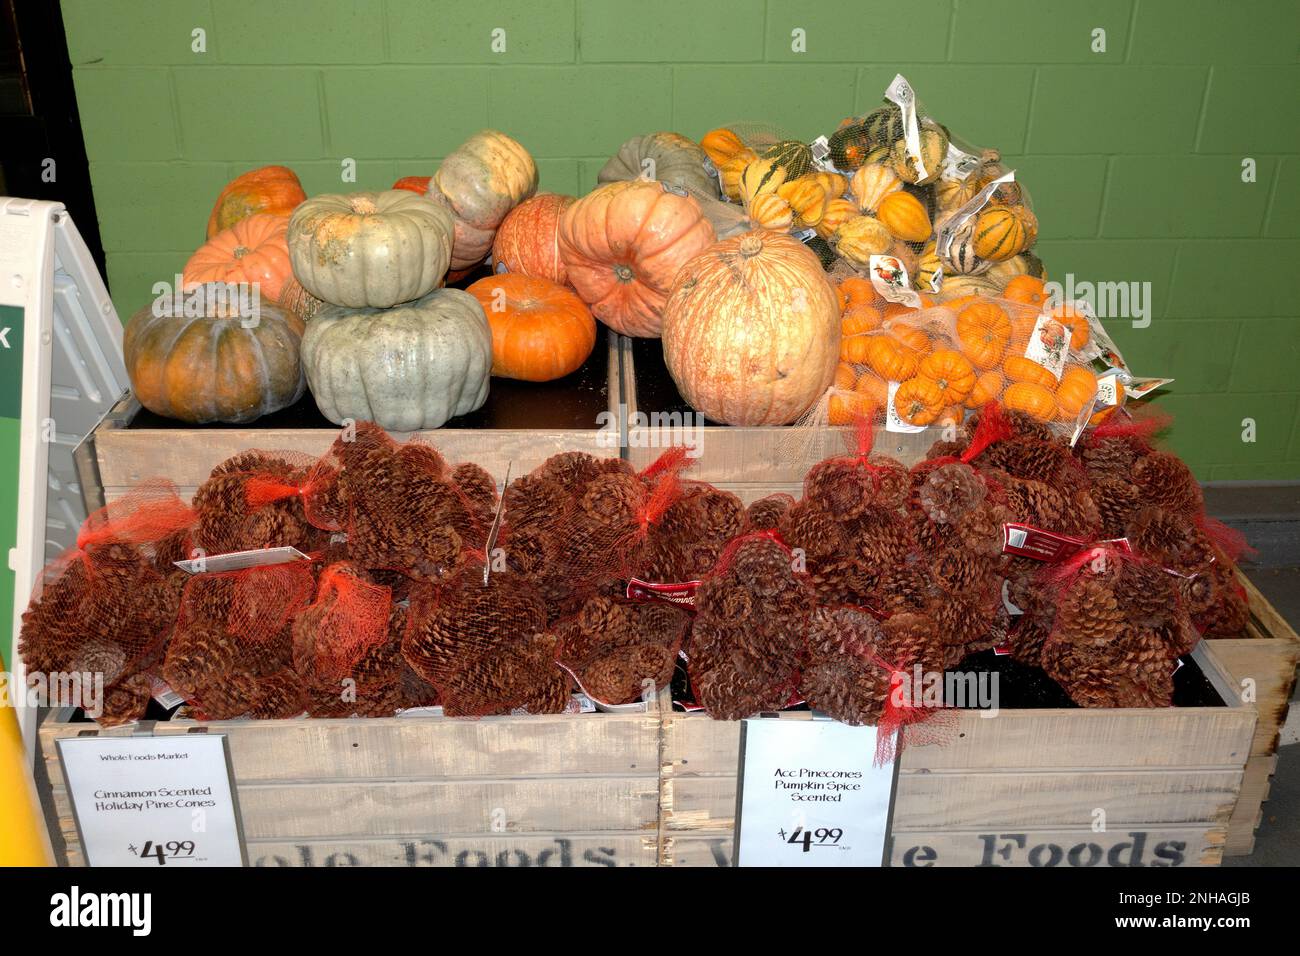 Autumn display at Whole Foods Market of pine cones and an array of various squash. St Paul Minnesota MN USA Stock Photo